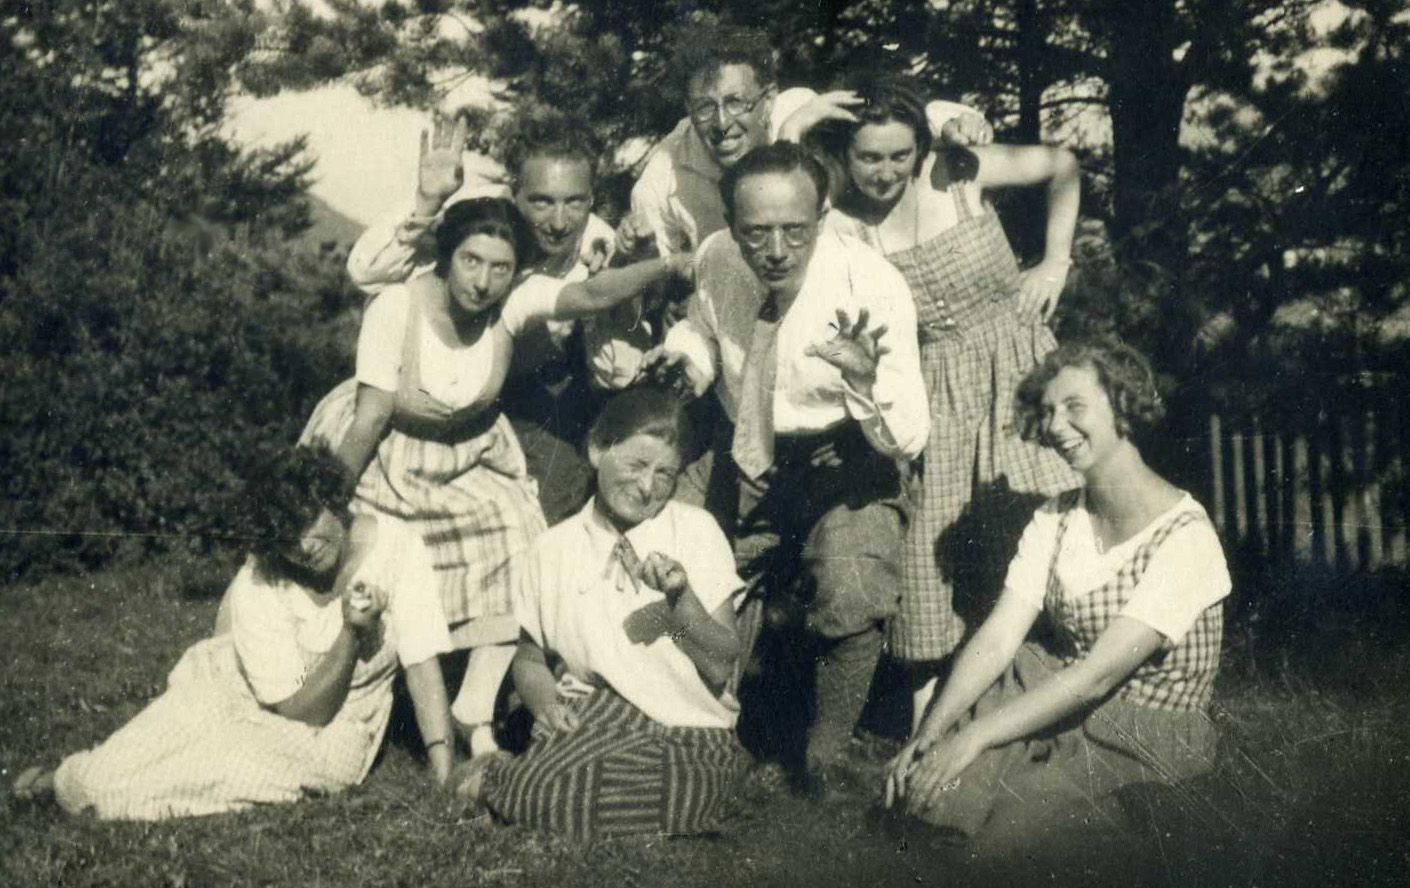 Edward and Grete Bibring pictured during a trip with friends.